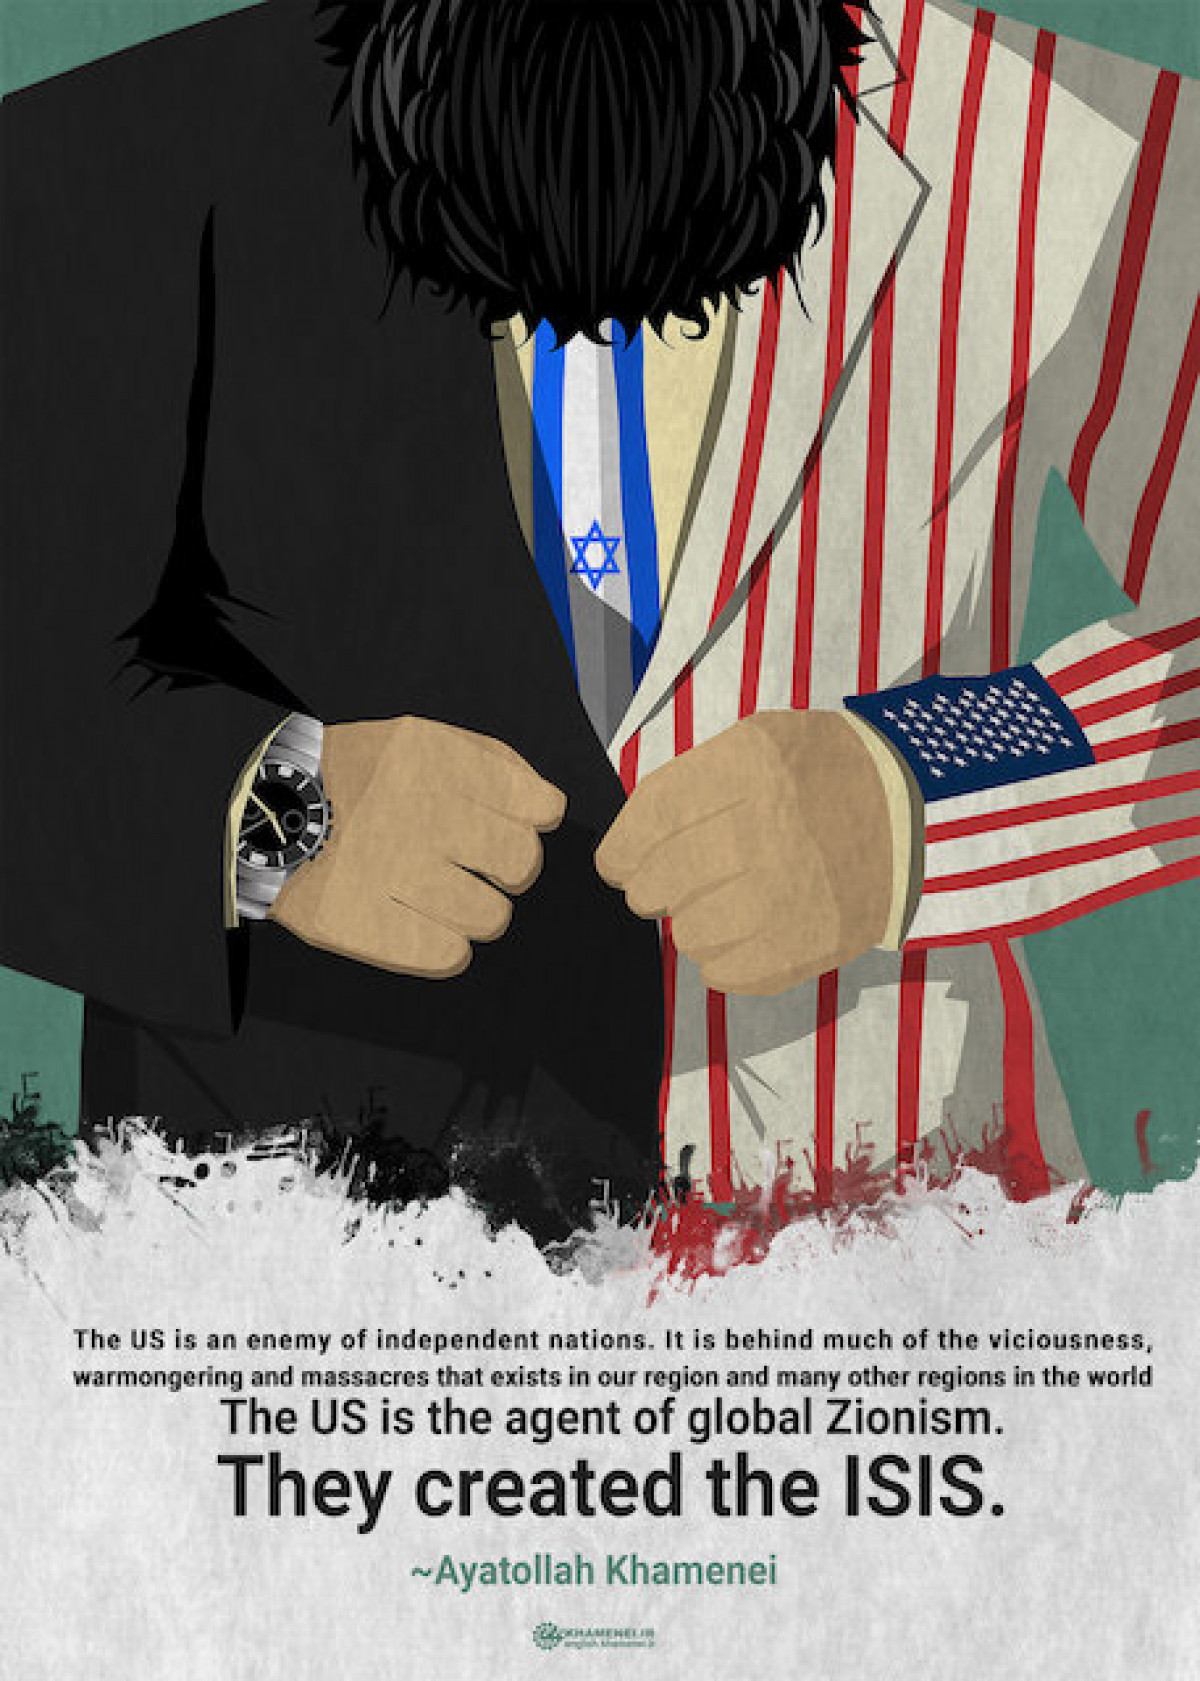 U.S. the agent of global Zionism, the creator of ISIS